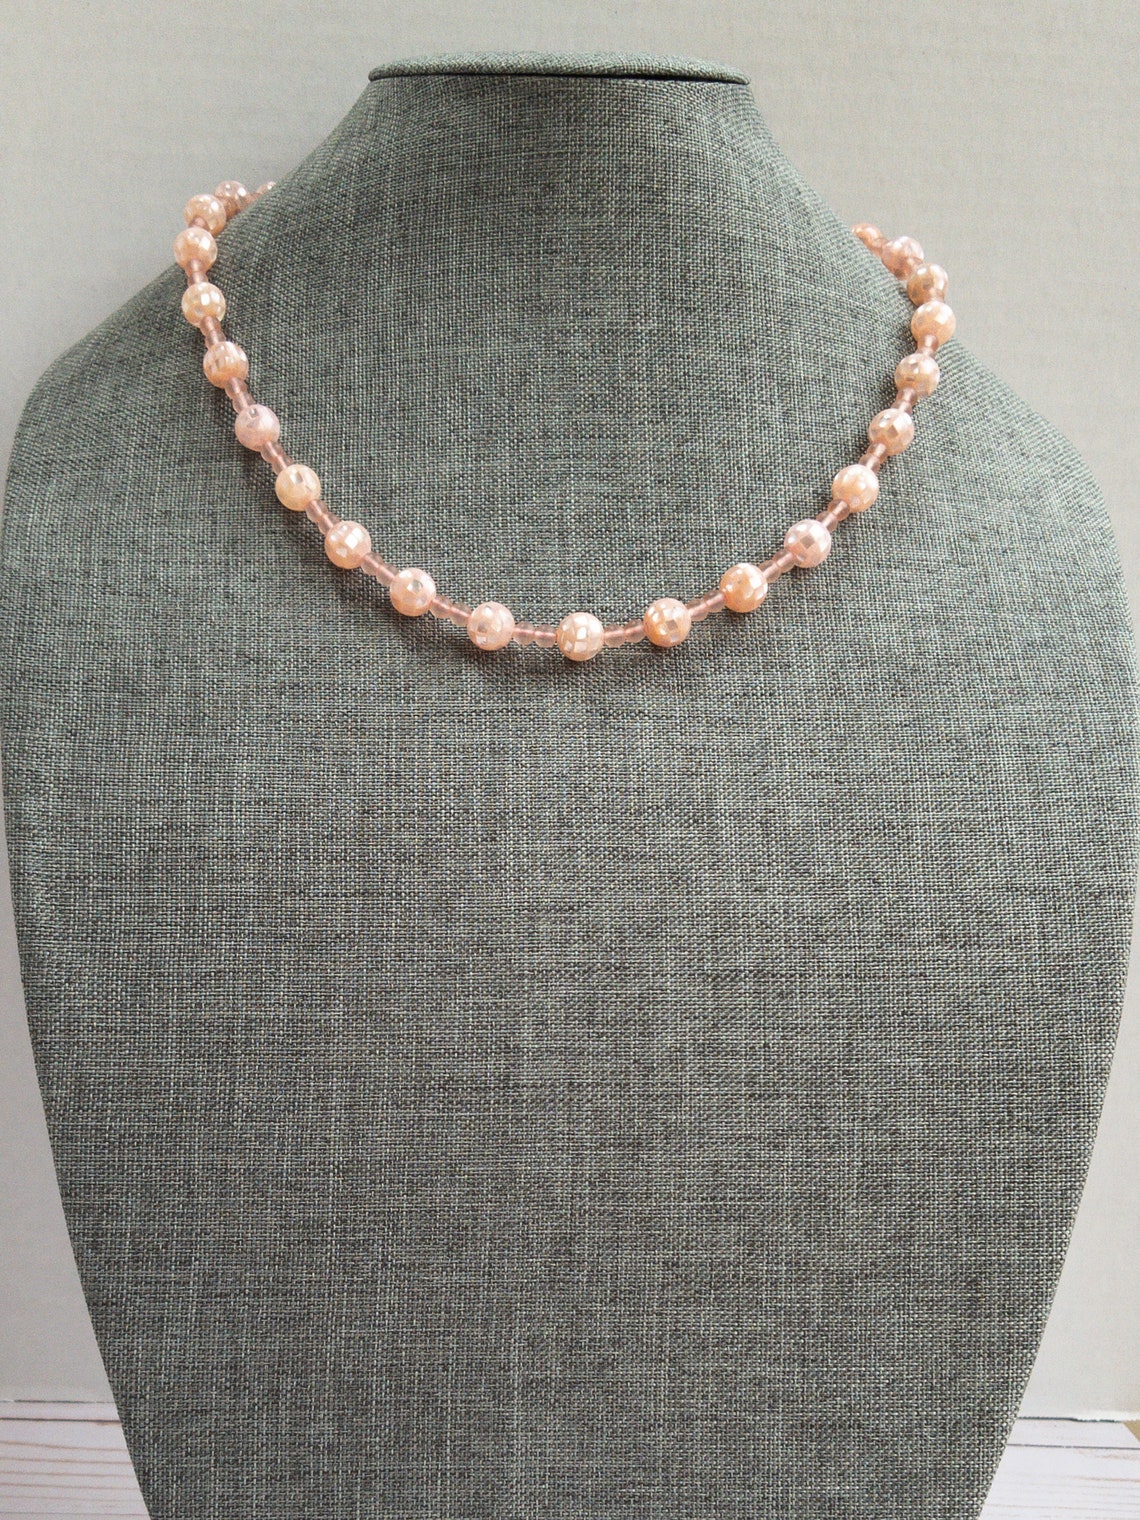 Pink Shell Bead Necklace, Pink Glass Bead Necklace, Spring Necklace ...